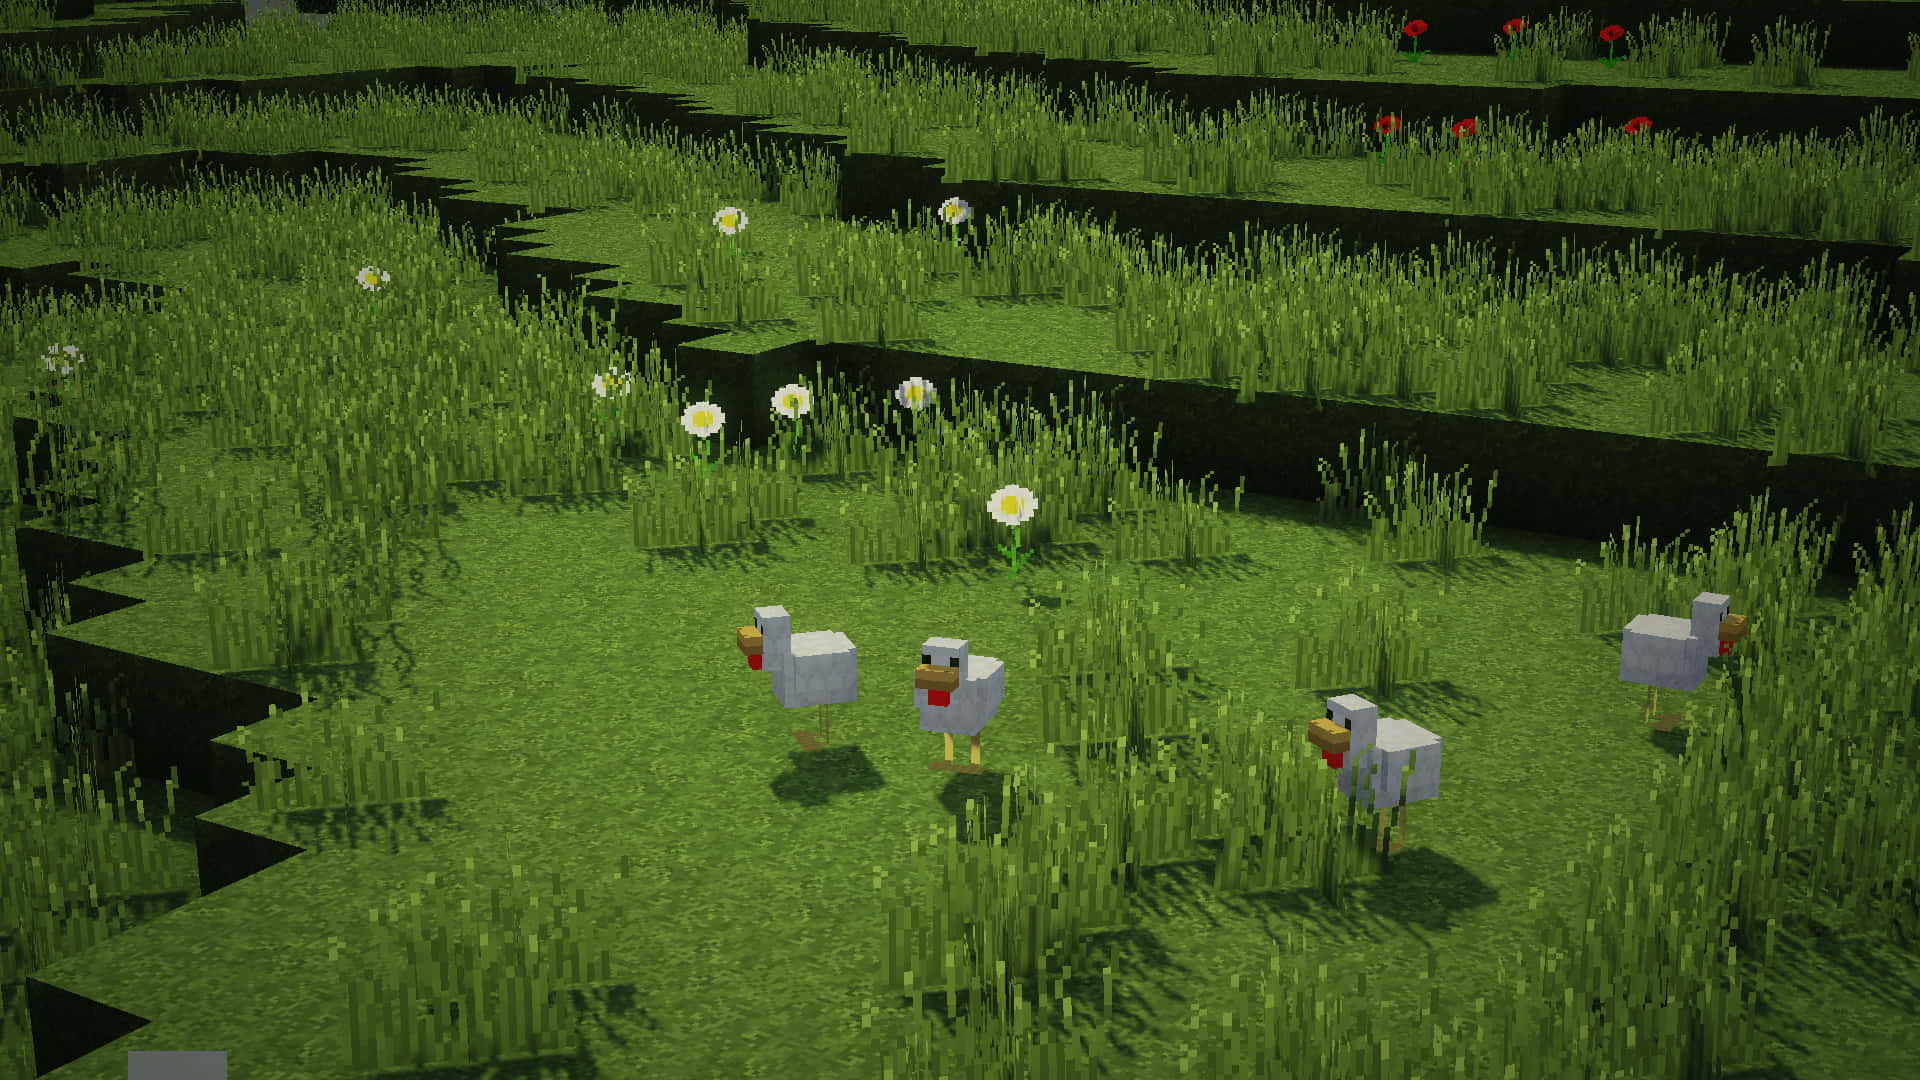 Witness the Incredible Graphics of Minecraft Shaders" Wallpaper